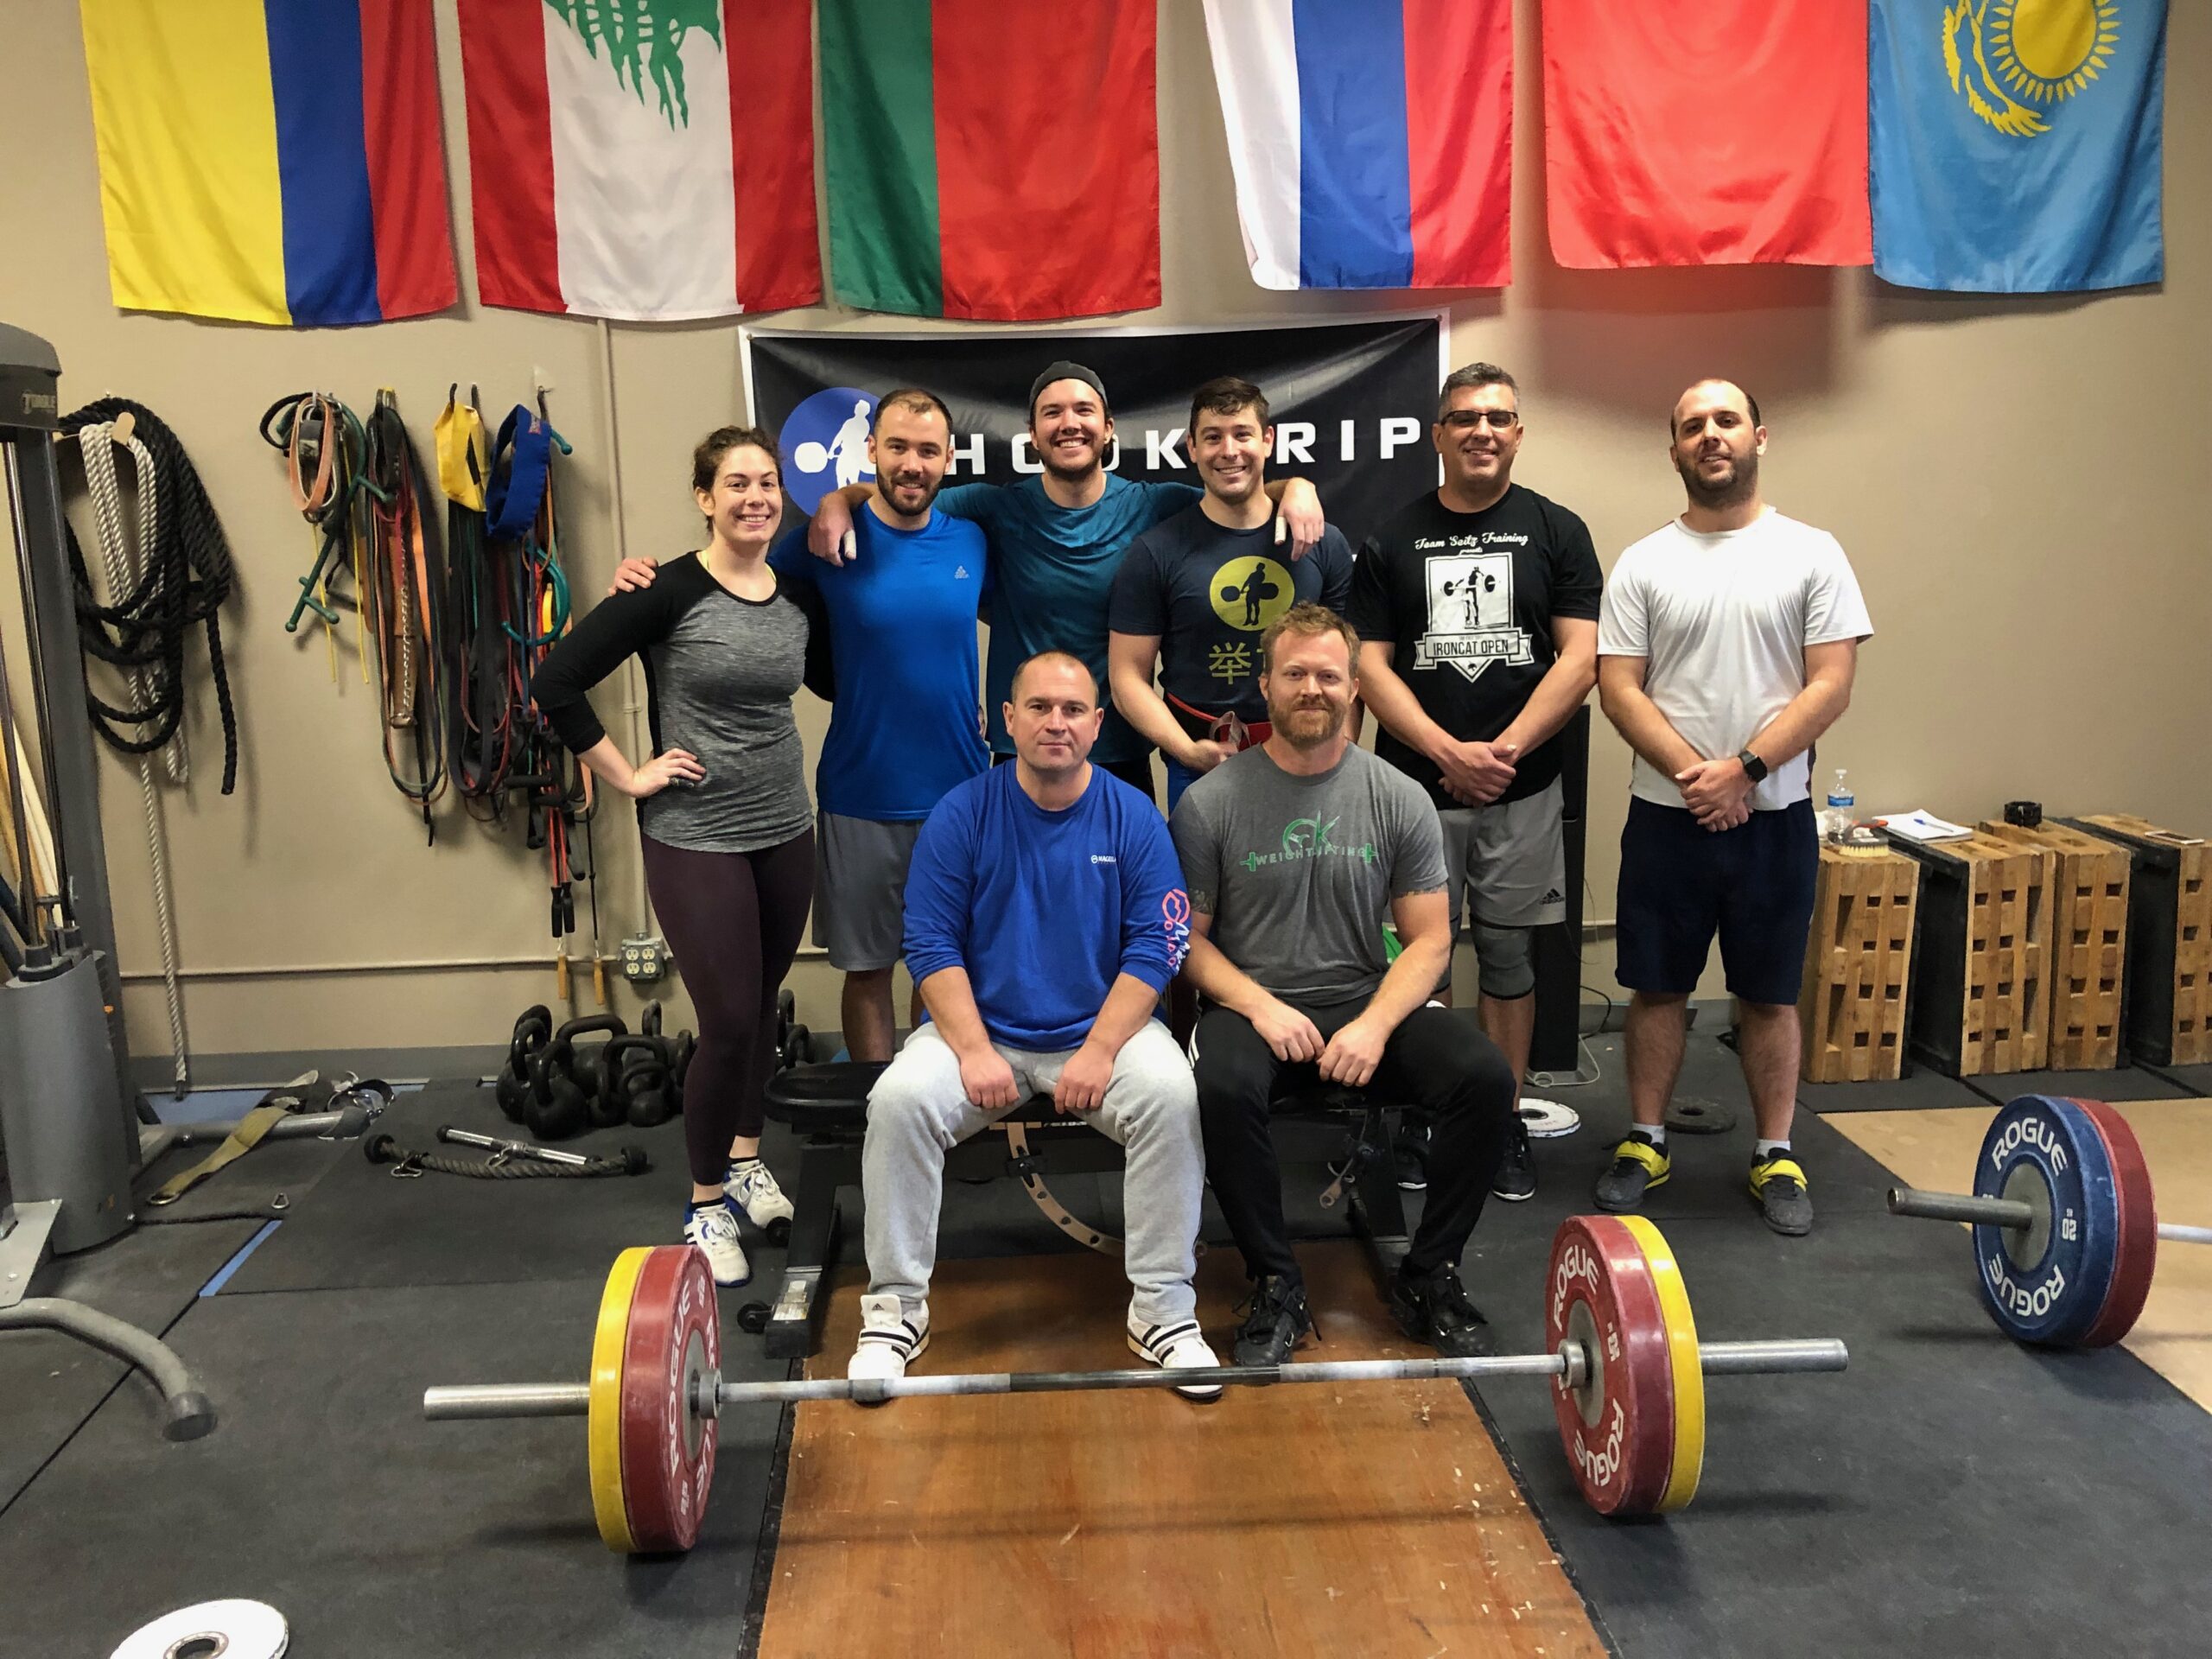 Group of olympic weightlifters posing for a group photo in front of a barbell with flags behind them